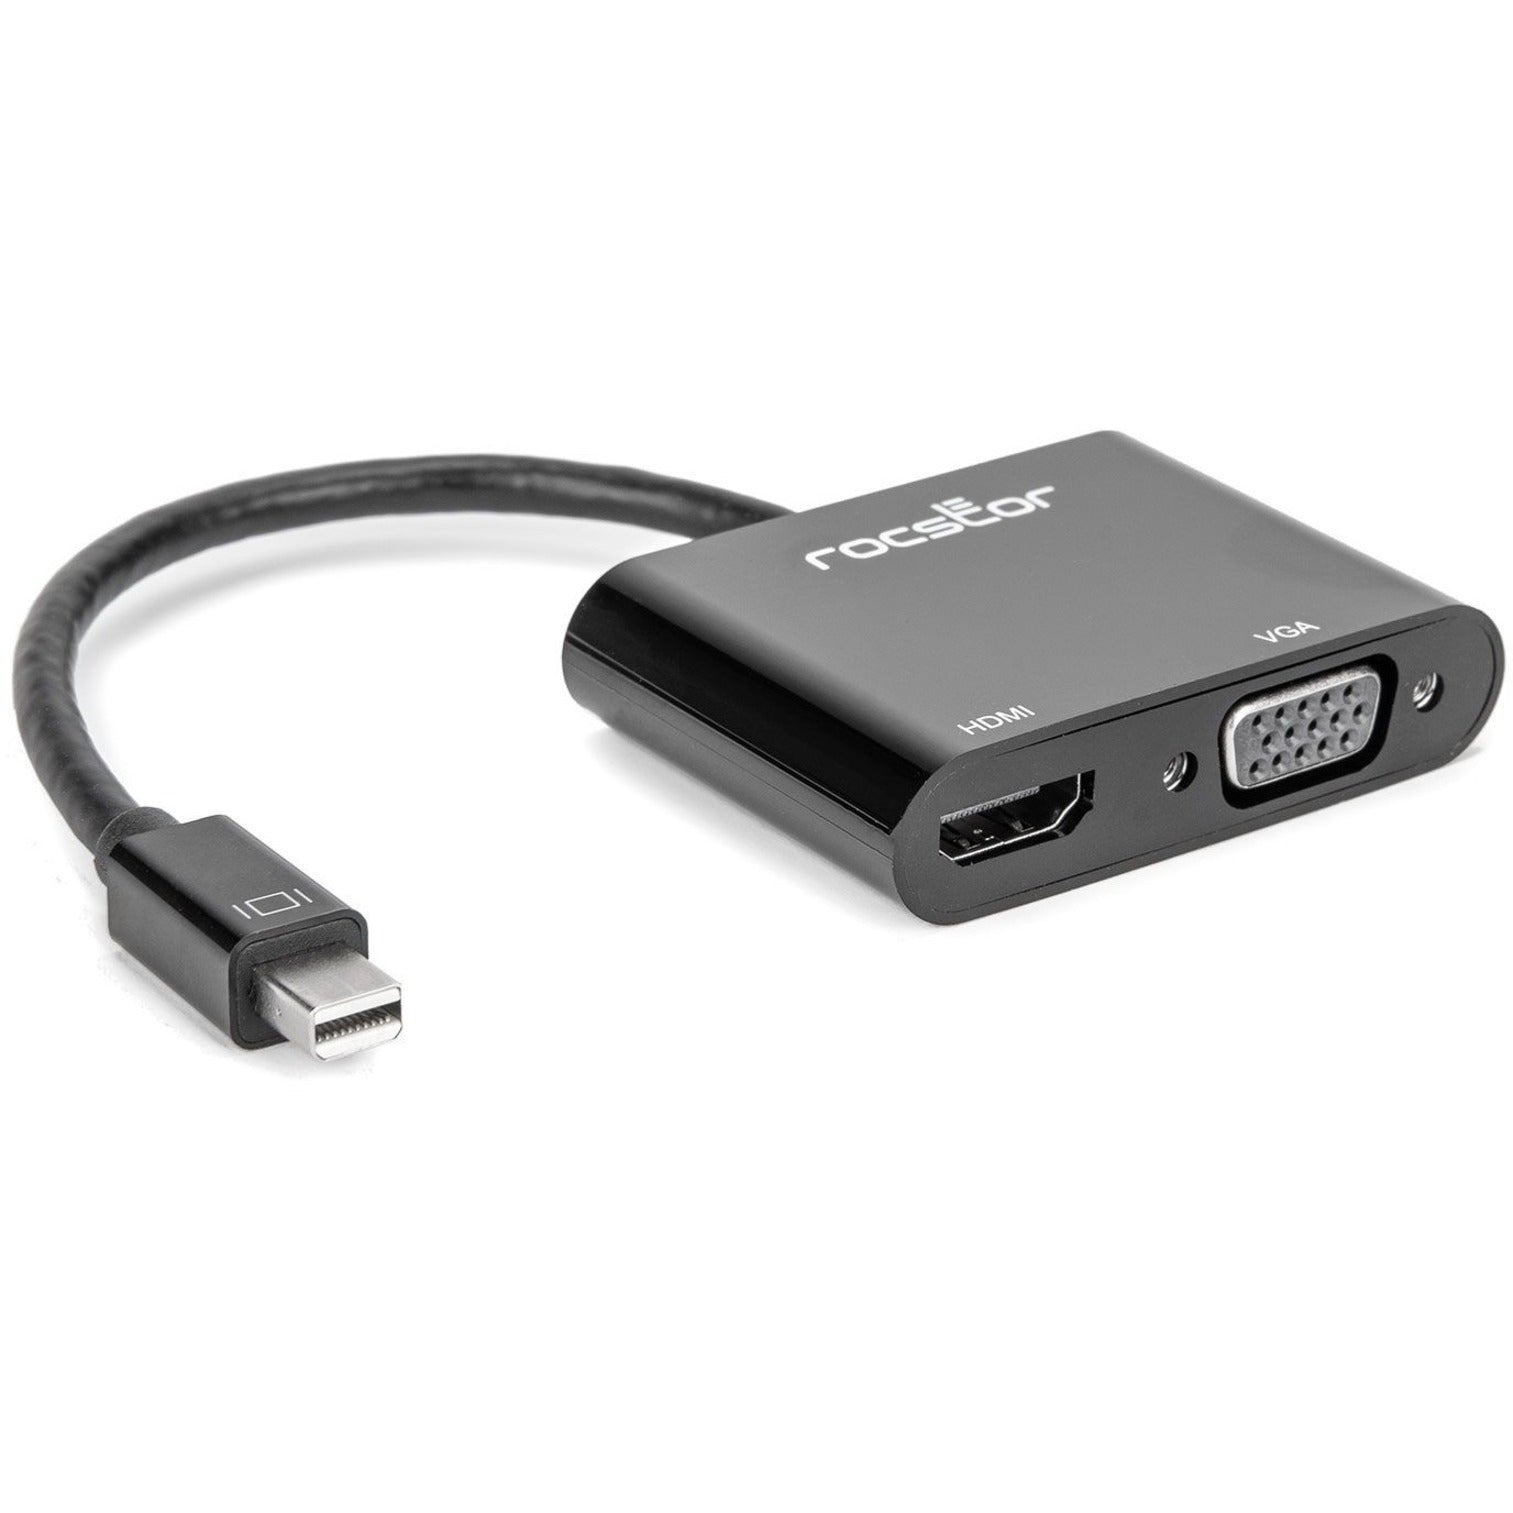 Rocstor Y10A261-B1 Premium 2-in-1 Mini DisplayPort to HDMI 4K 30Hz or VGA Adapter Converter, Plug and Play, 3-Year Warranty